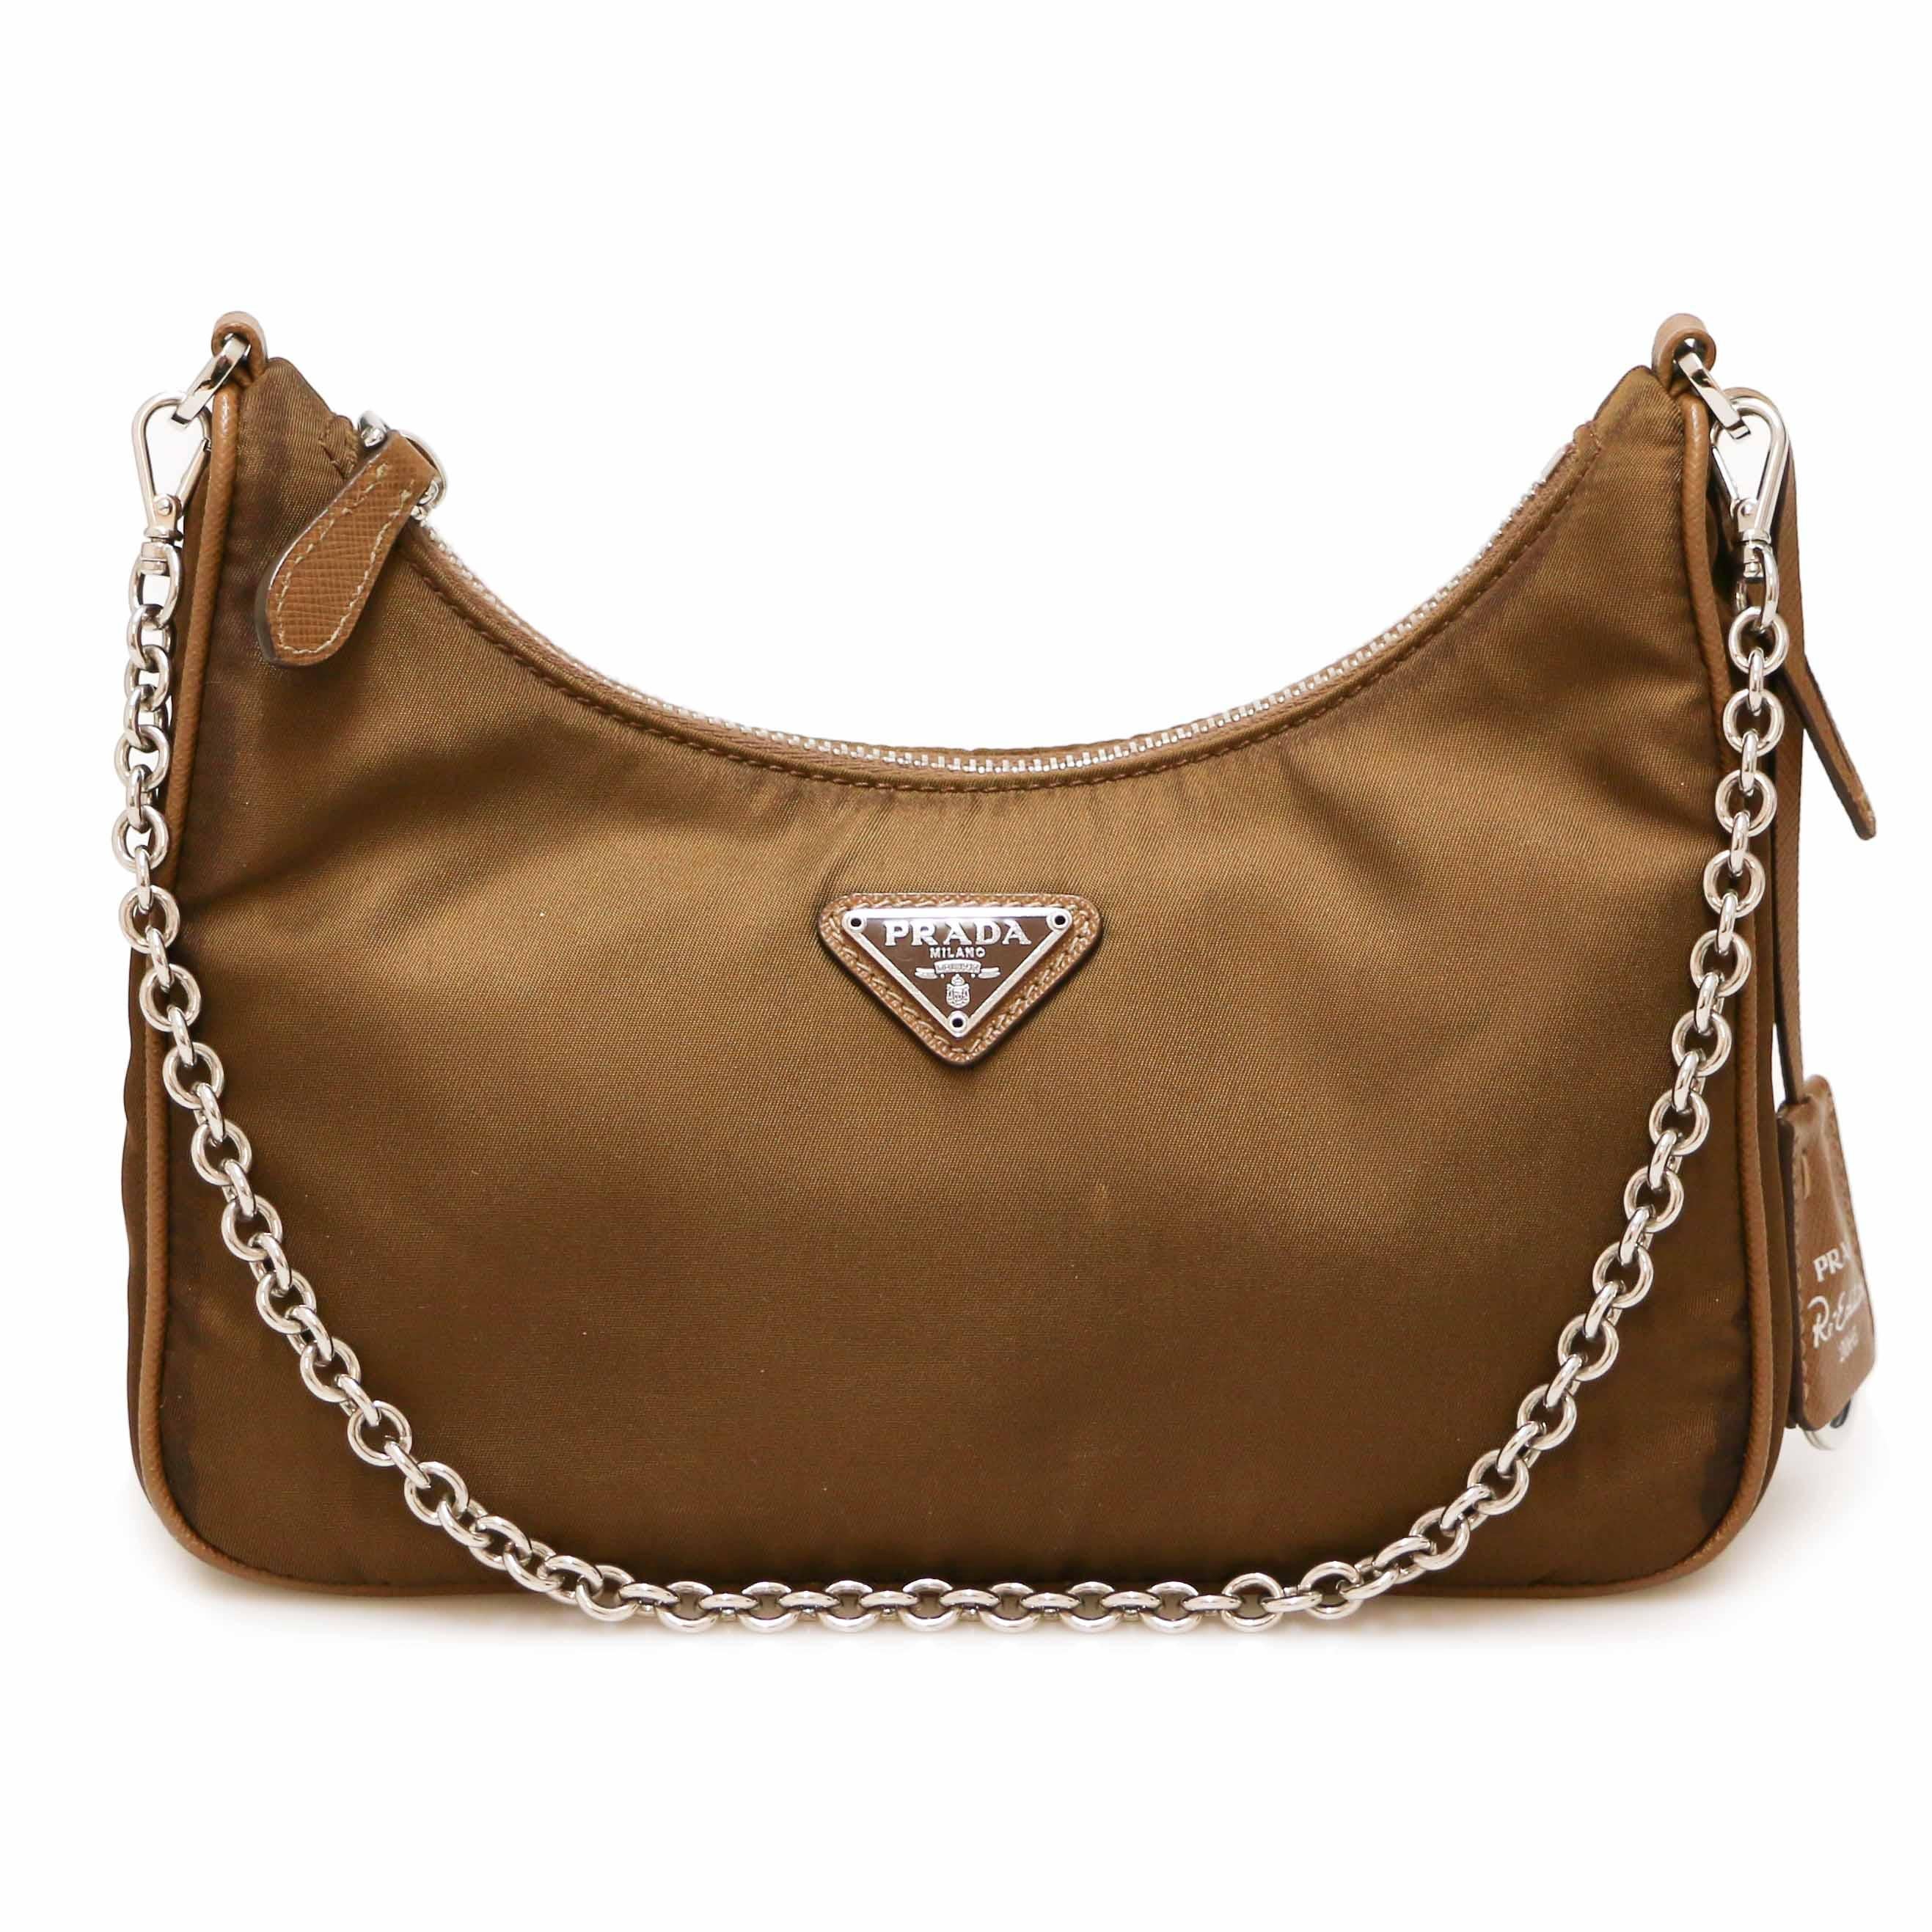 The essential Prada bag in brown nylon with its strap in its 2005 re-edition.

Condition: very good
Made in italy
Collection: Prada 2005 re-edition
Materials: nylon
Interior: brown fabric with logo
Color: brown
Dimensions: 22 x 18 x 6 cm 
Strap